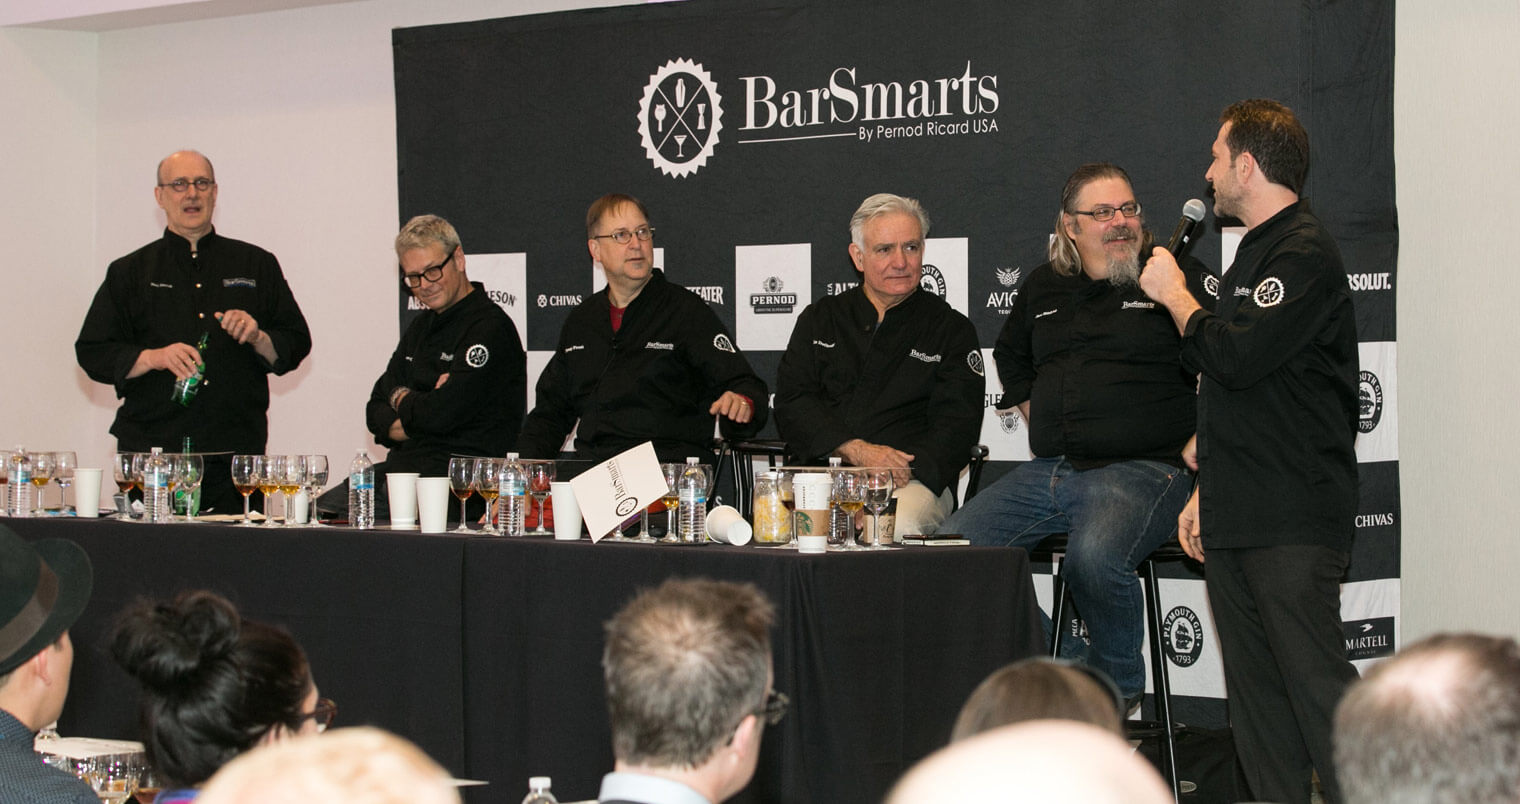 Pernod Ricard USA Hosts 40th Barsmarts Live Event in Denver, industry news, featured image